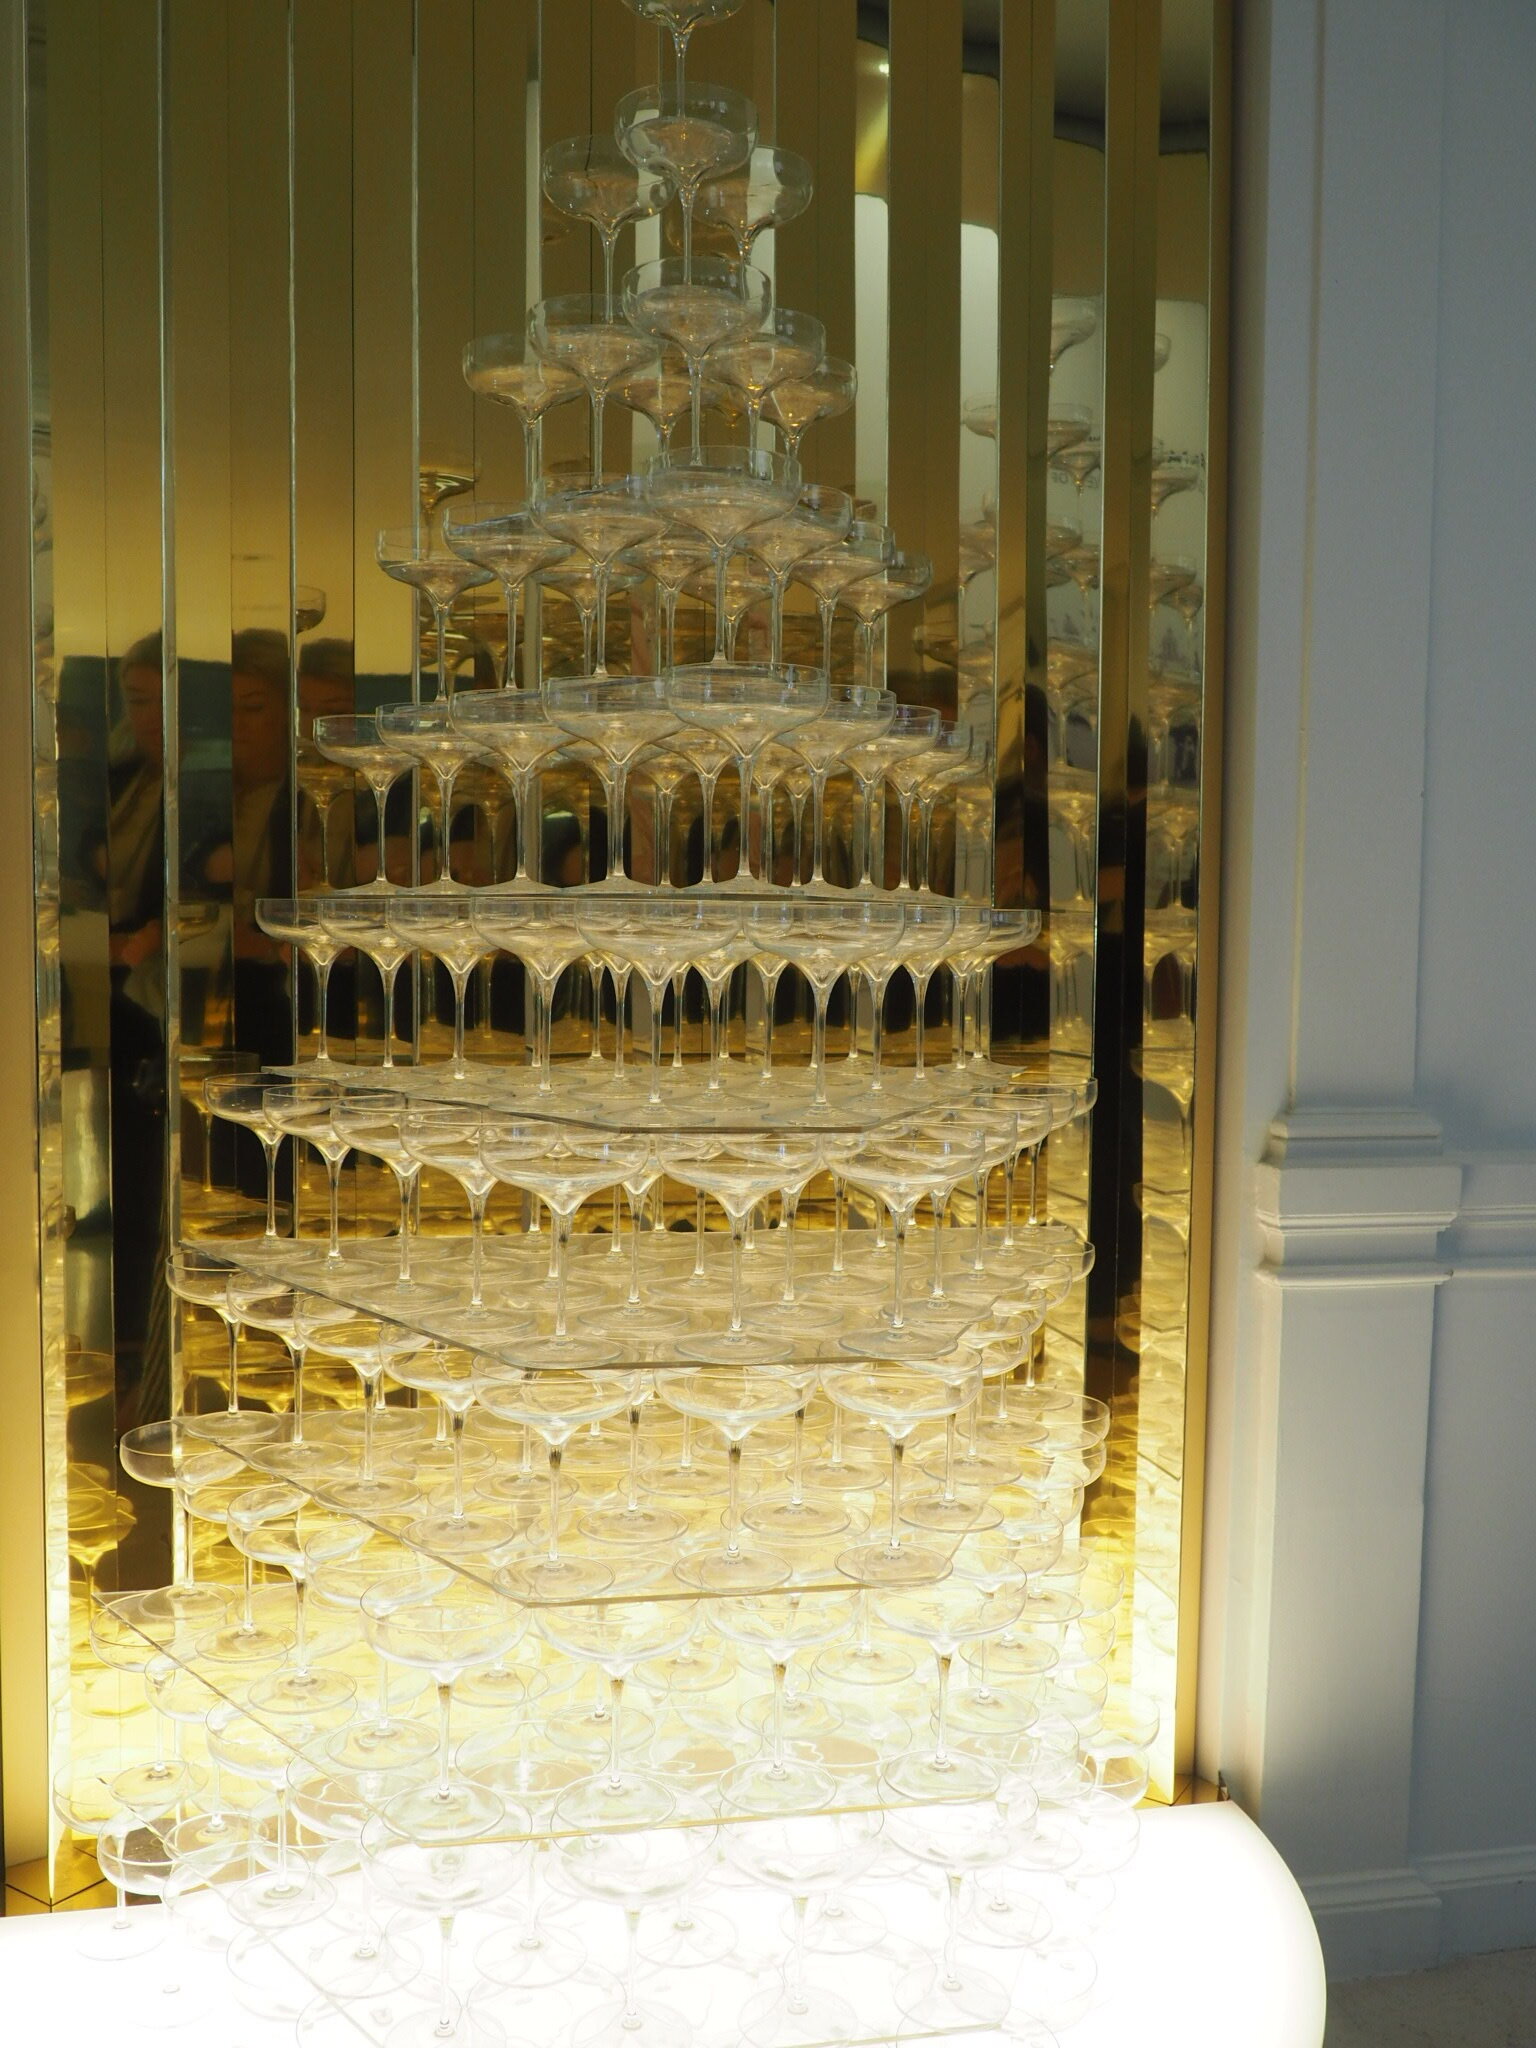 A Champagne tower display